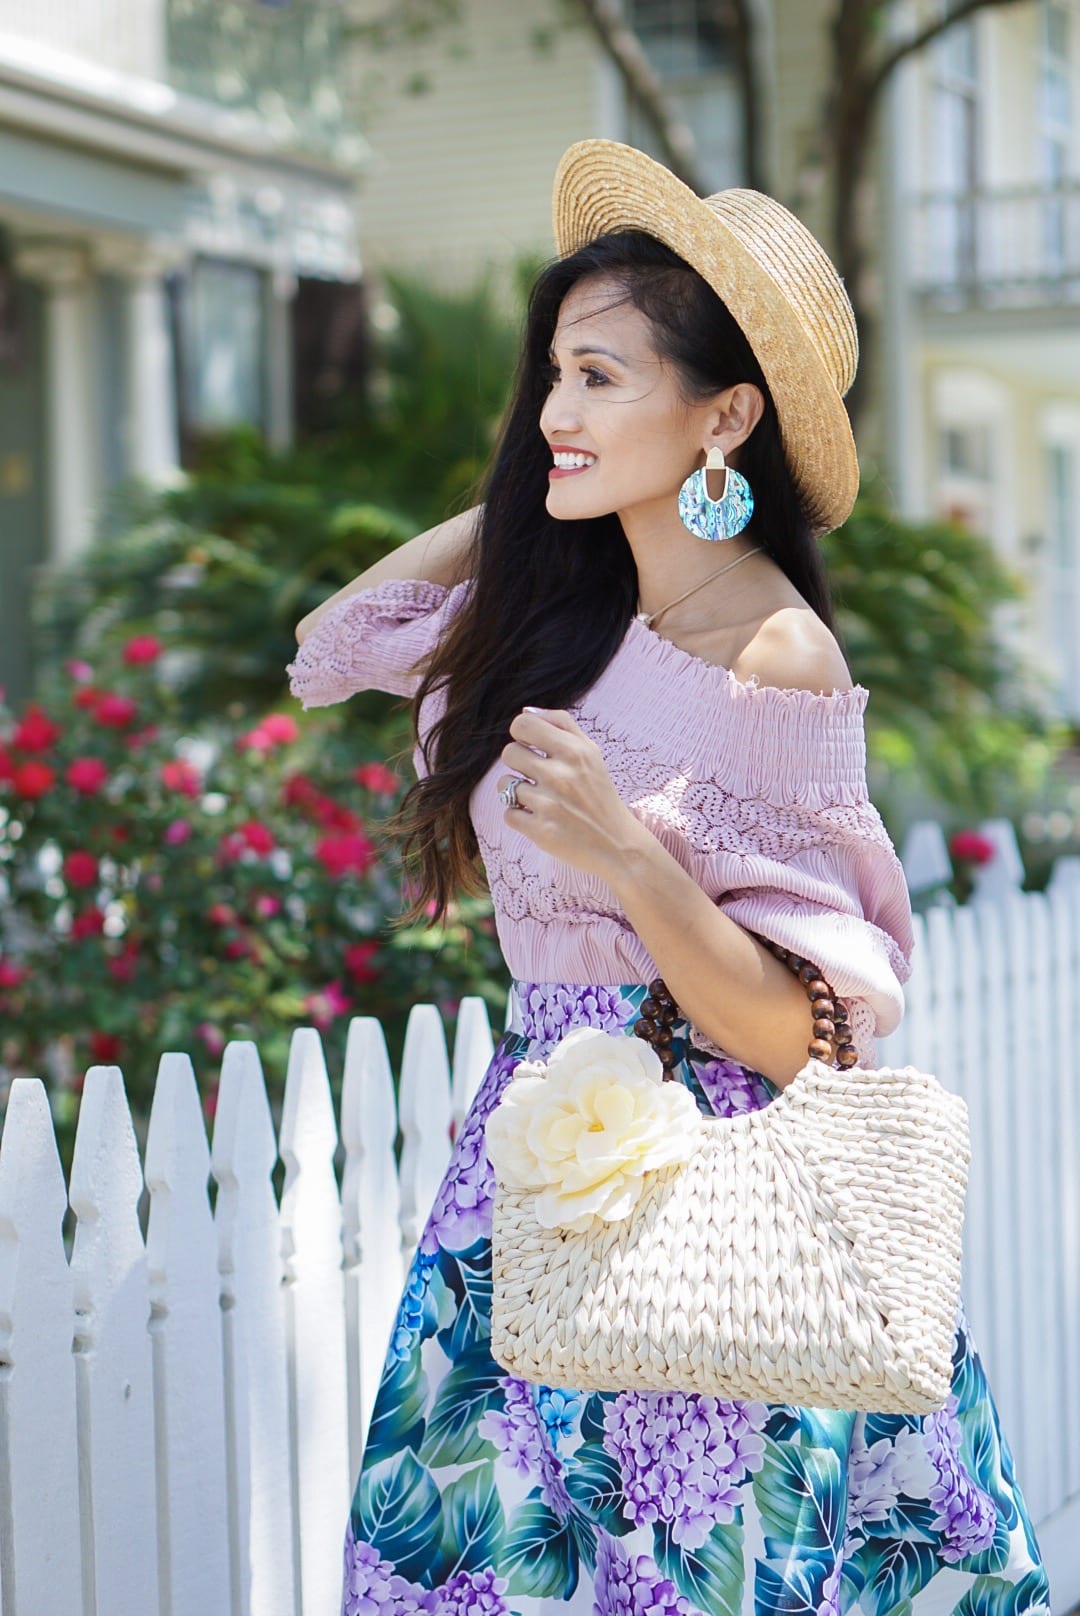 hydrangea skirt, floral skirt, Sunday best, #summerstyle, #sundaybrunchoutfit, #kendrascott, off the shoulder, #mothersday, Mother's Day outfit, straw bag, embroidered block heels, Mother's Day 